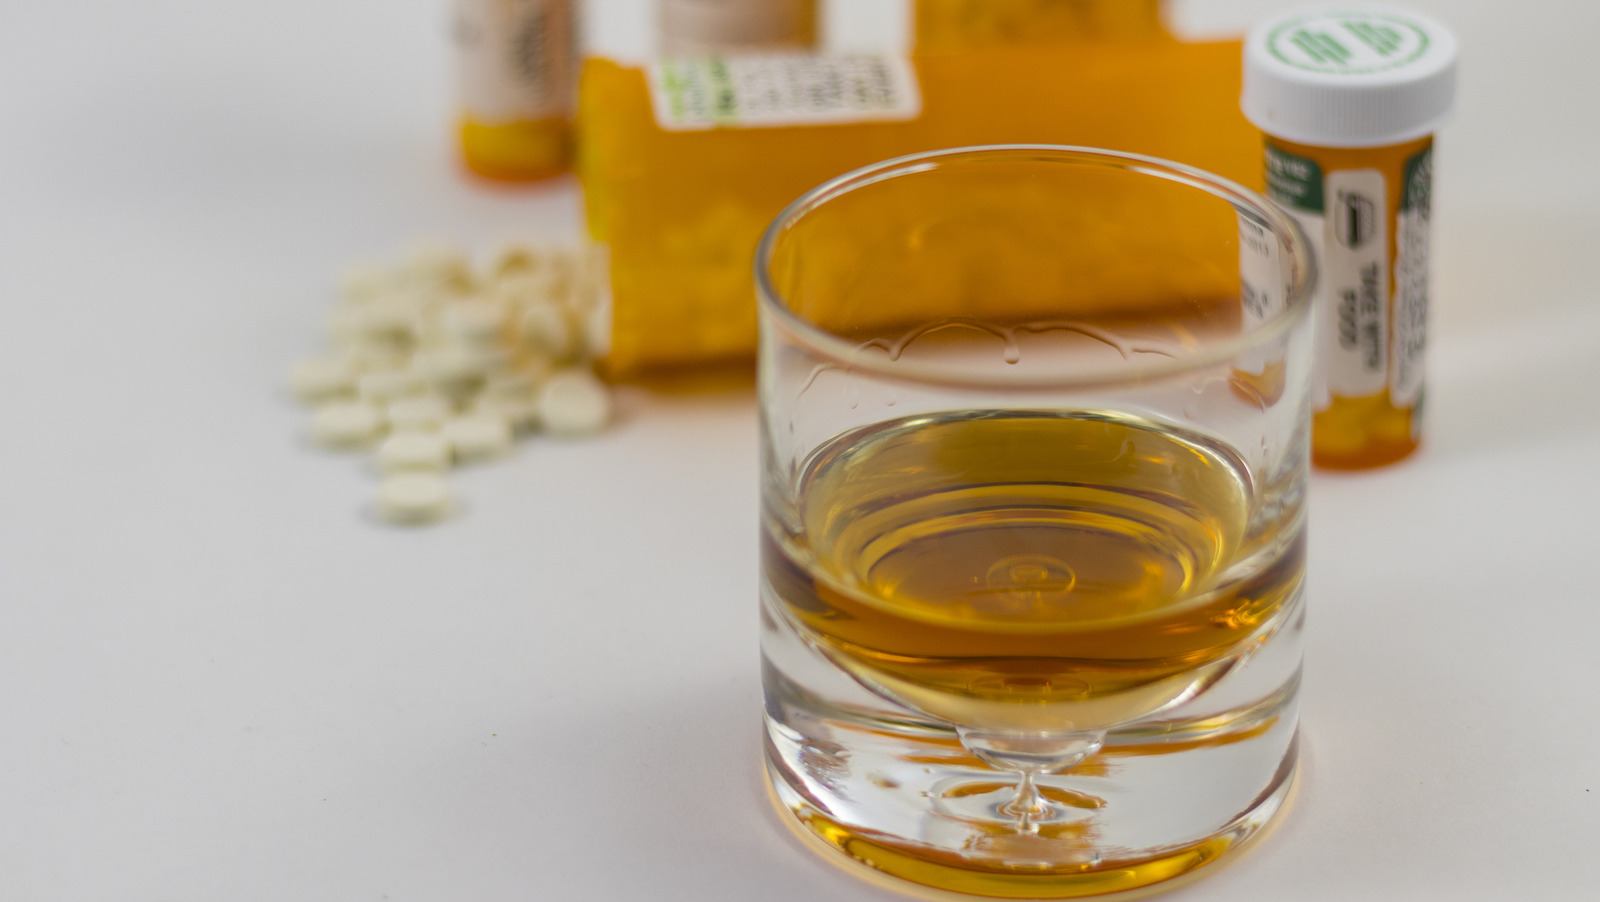 Dangers of Mixing Alcohol & Muscle Relaxers